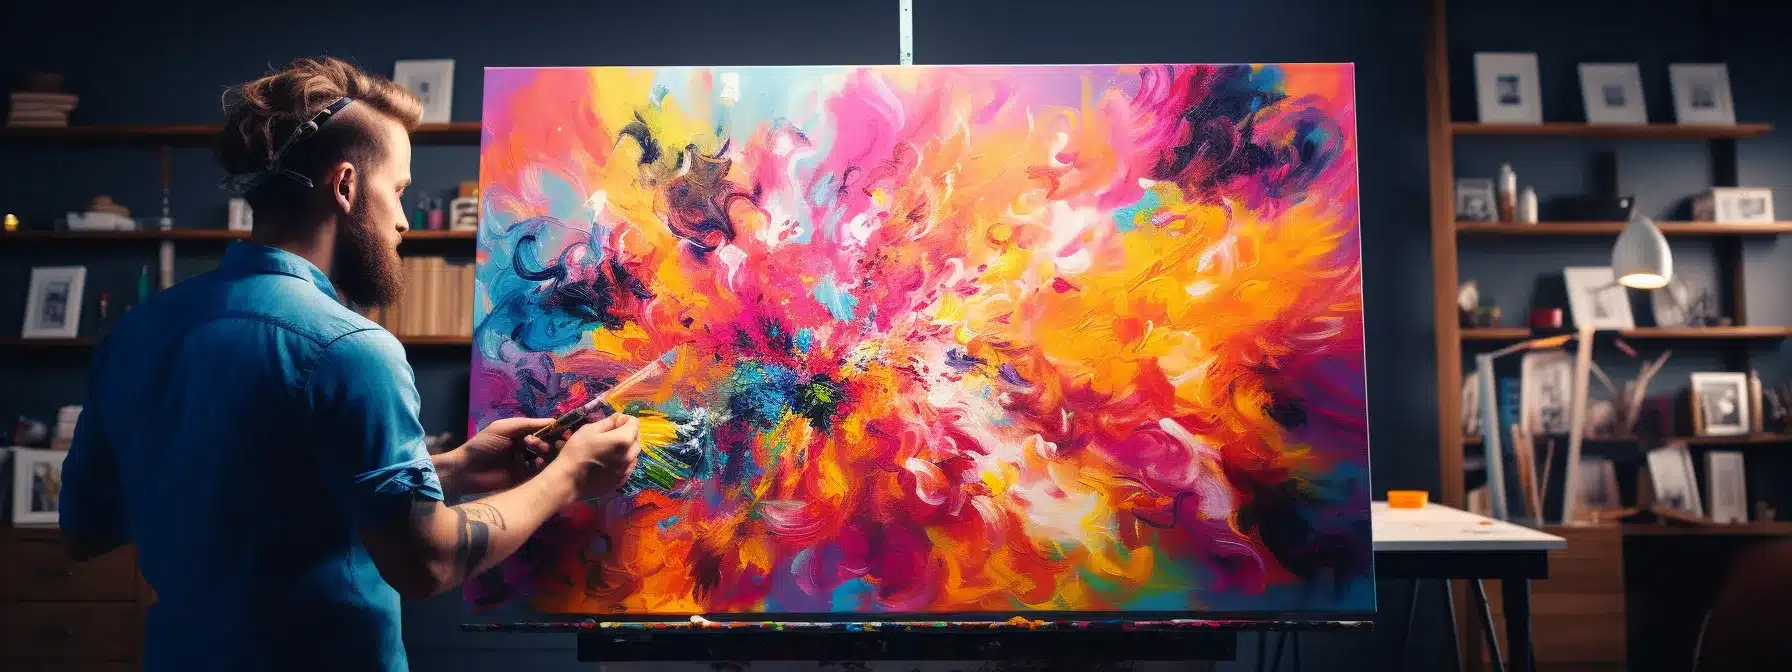 A Person Painting With Vibrant Colors On A Canvas, Creating A Logo Design And Brand Identity.